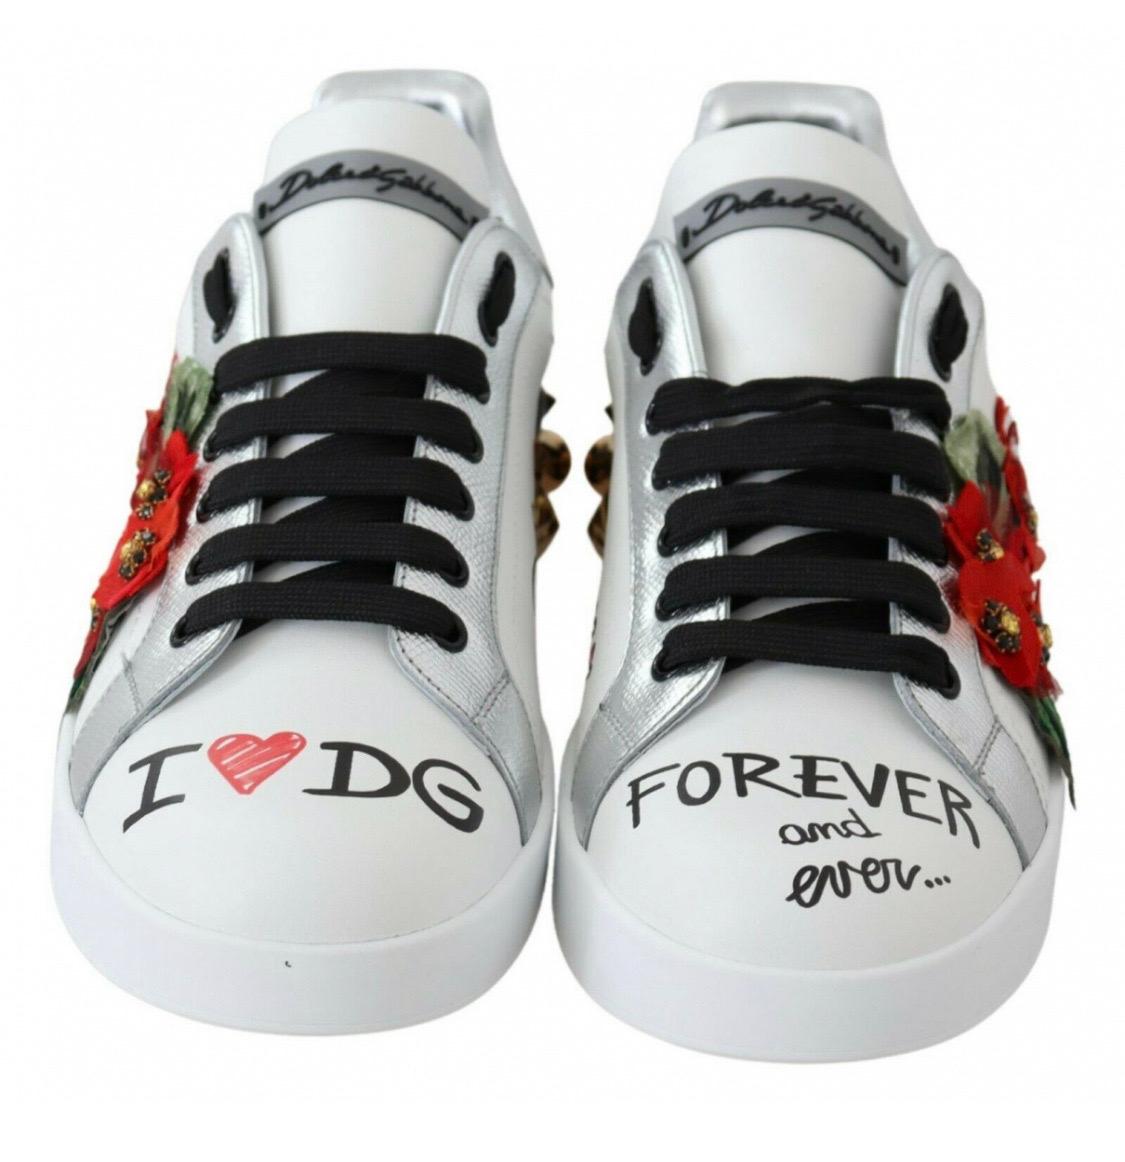 dolce gabbana pig sneakers